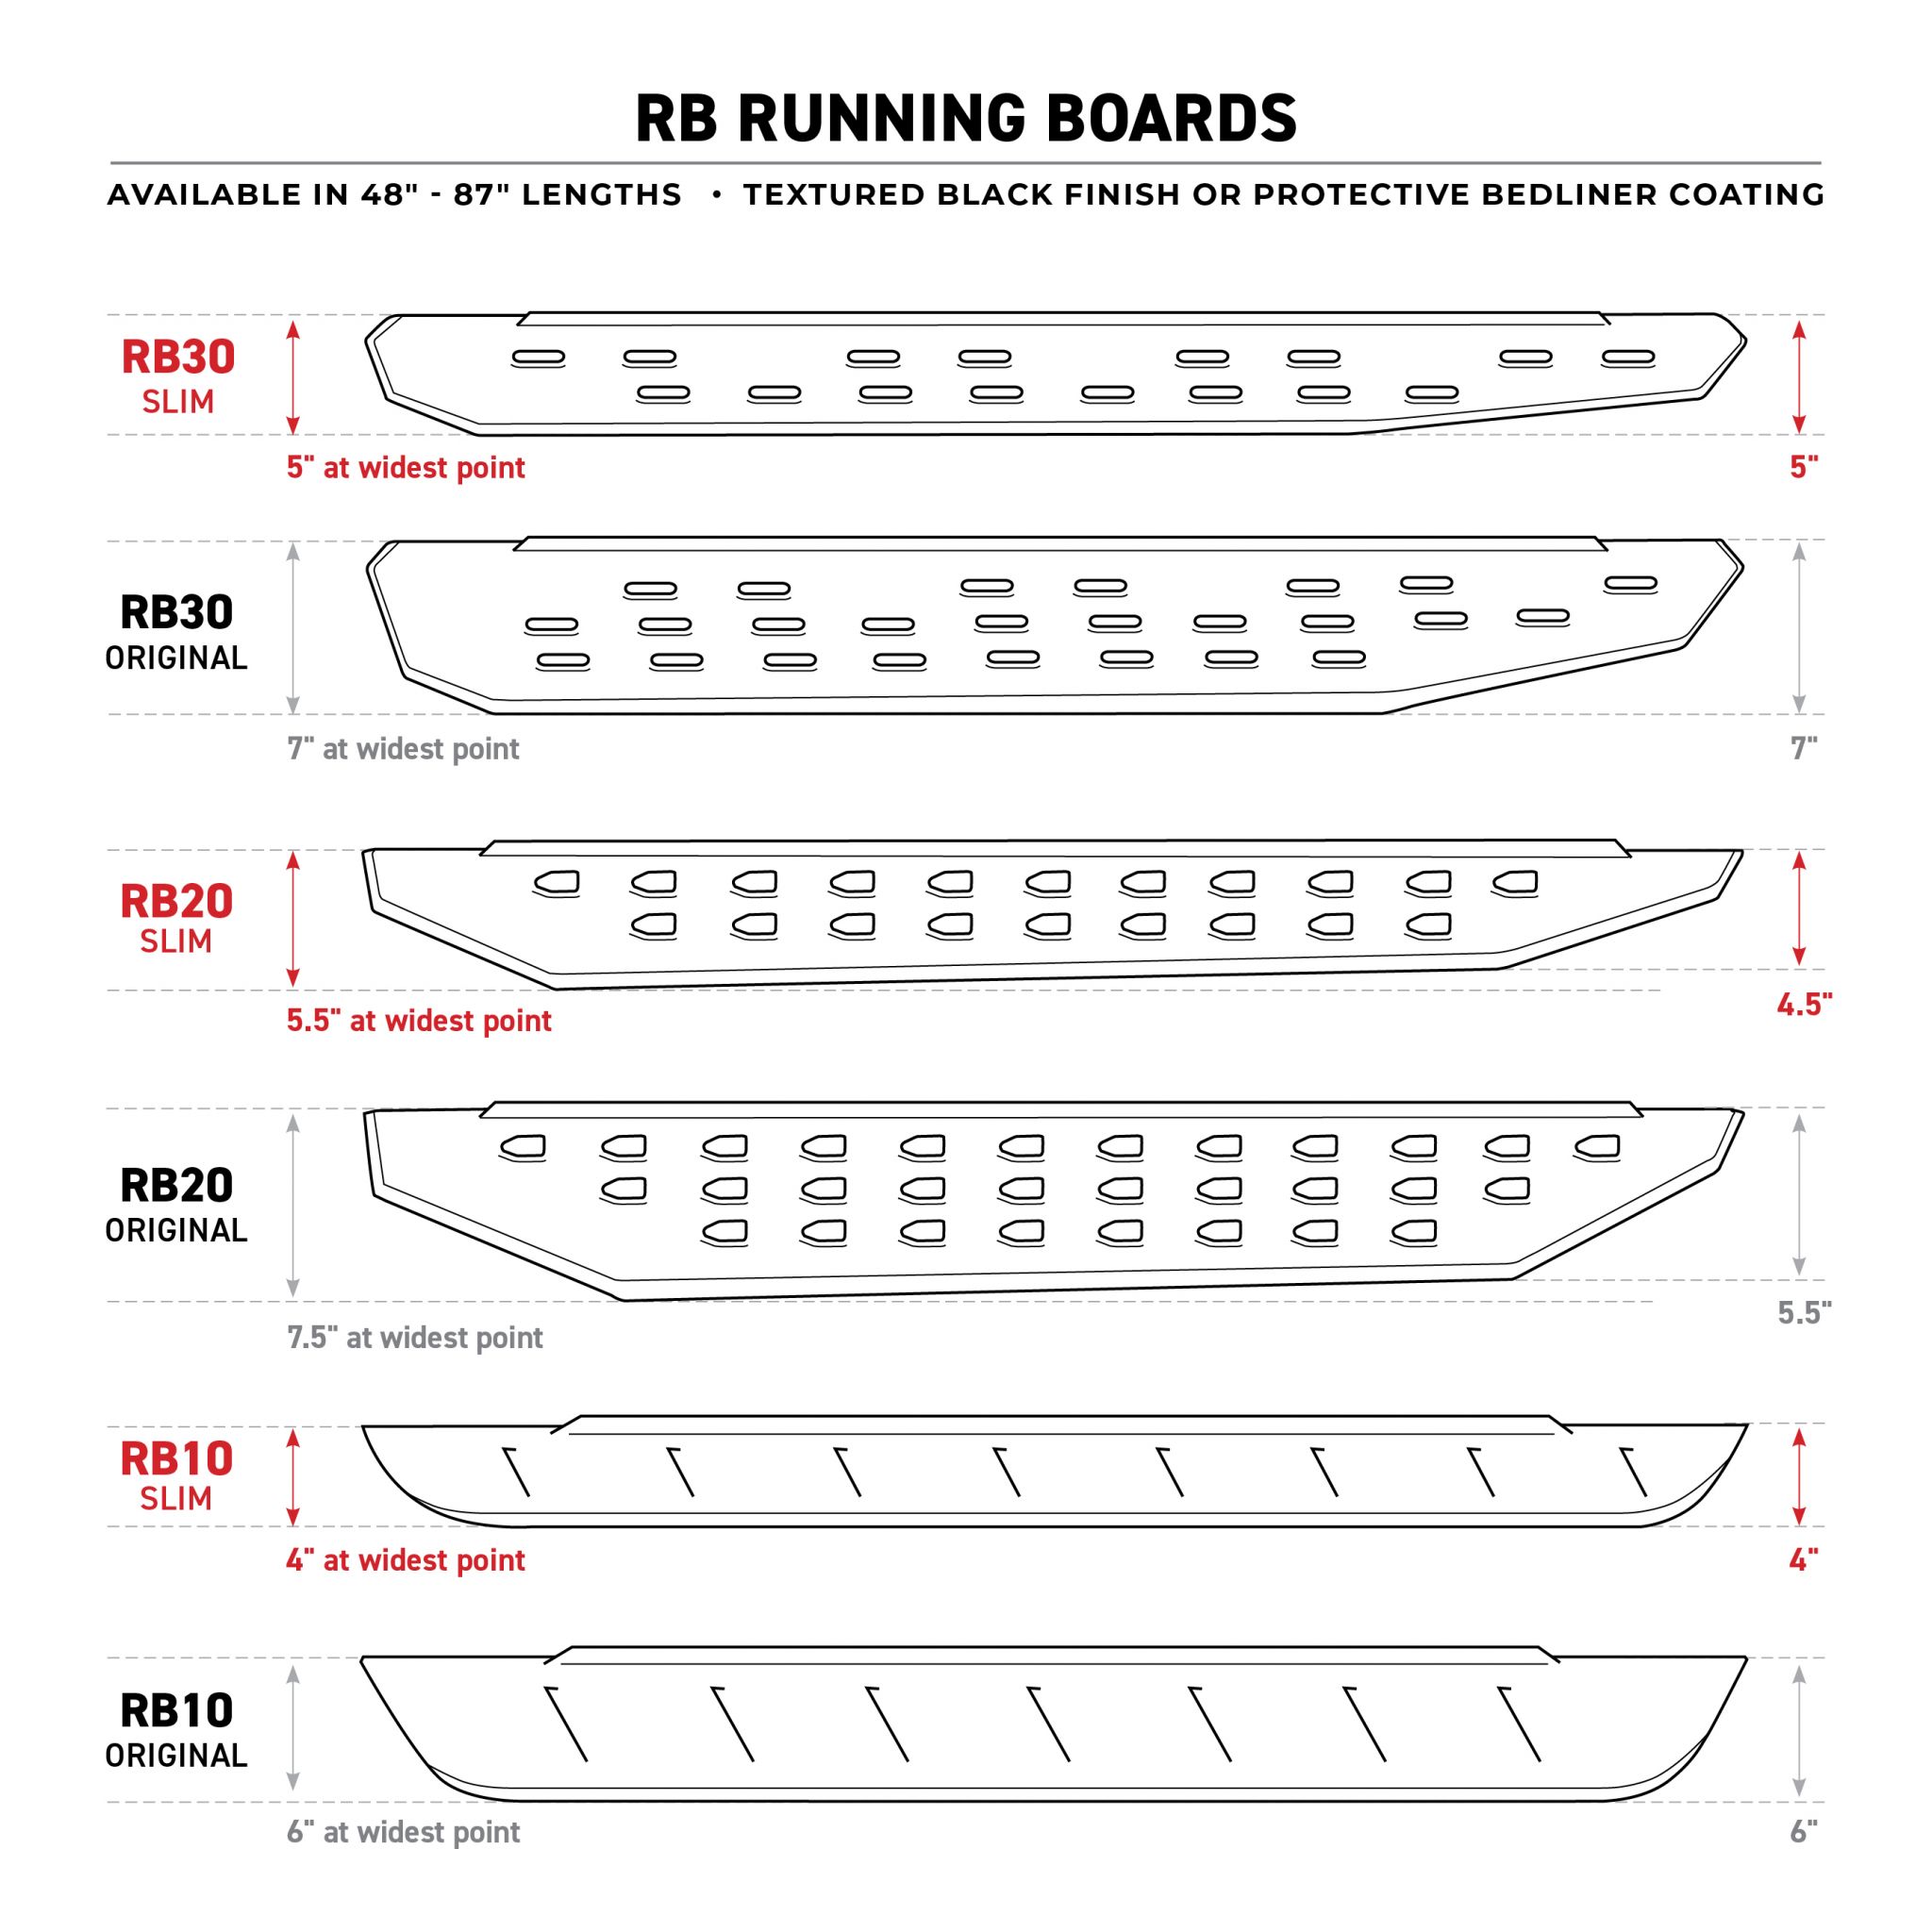 Go Rhino 69443973T - RB20 Running boards - Complete Kit: RB20 Running board + Brackets - Protective Bedliner coating